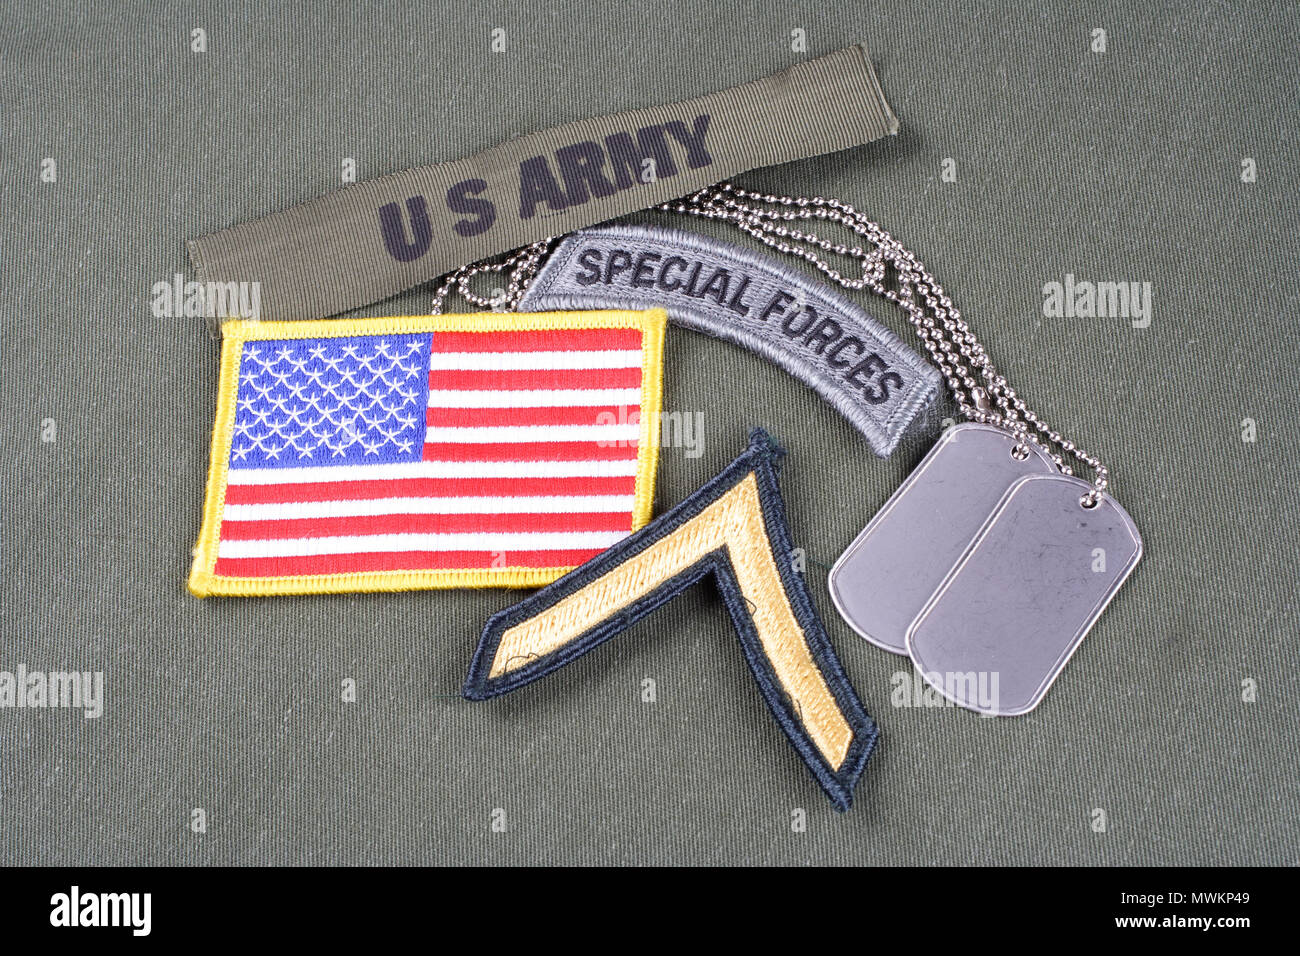 KIEV, UKRAINE - August 21, 2015. US ARMY special forces insignia on olive green uniform Stock Photo